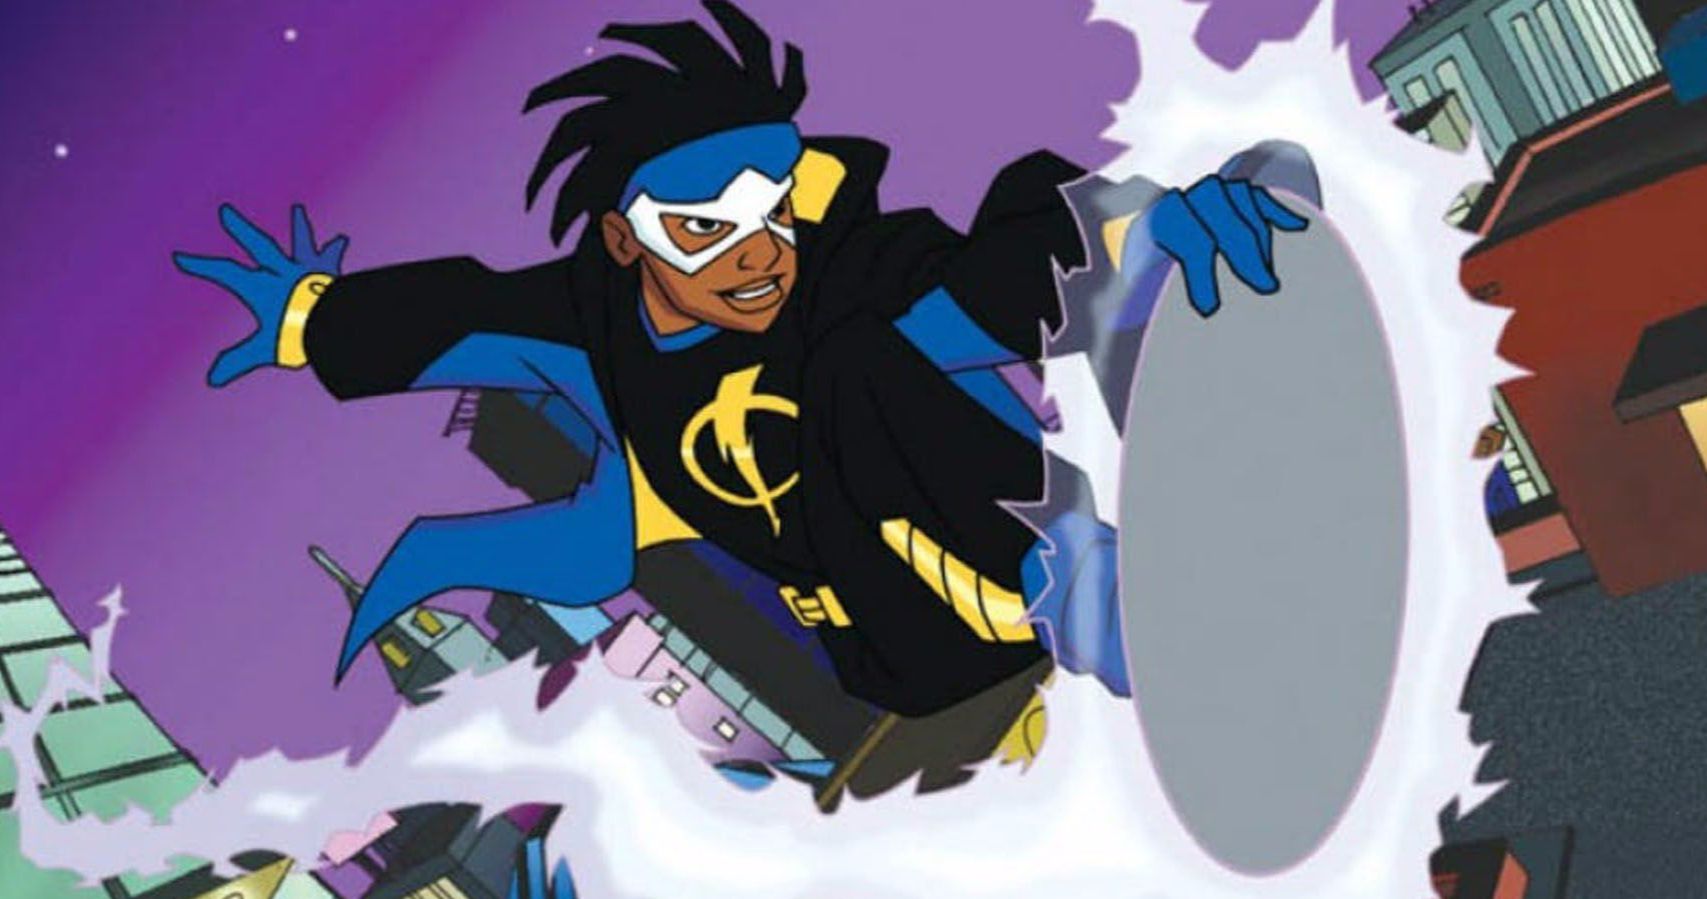 Static Shock Will Build a New DC Movie Universe Says Producer Michael B. Jordan